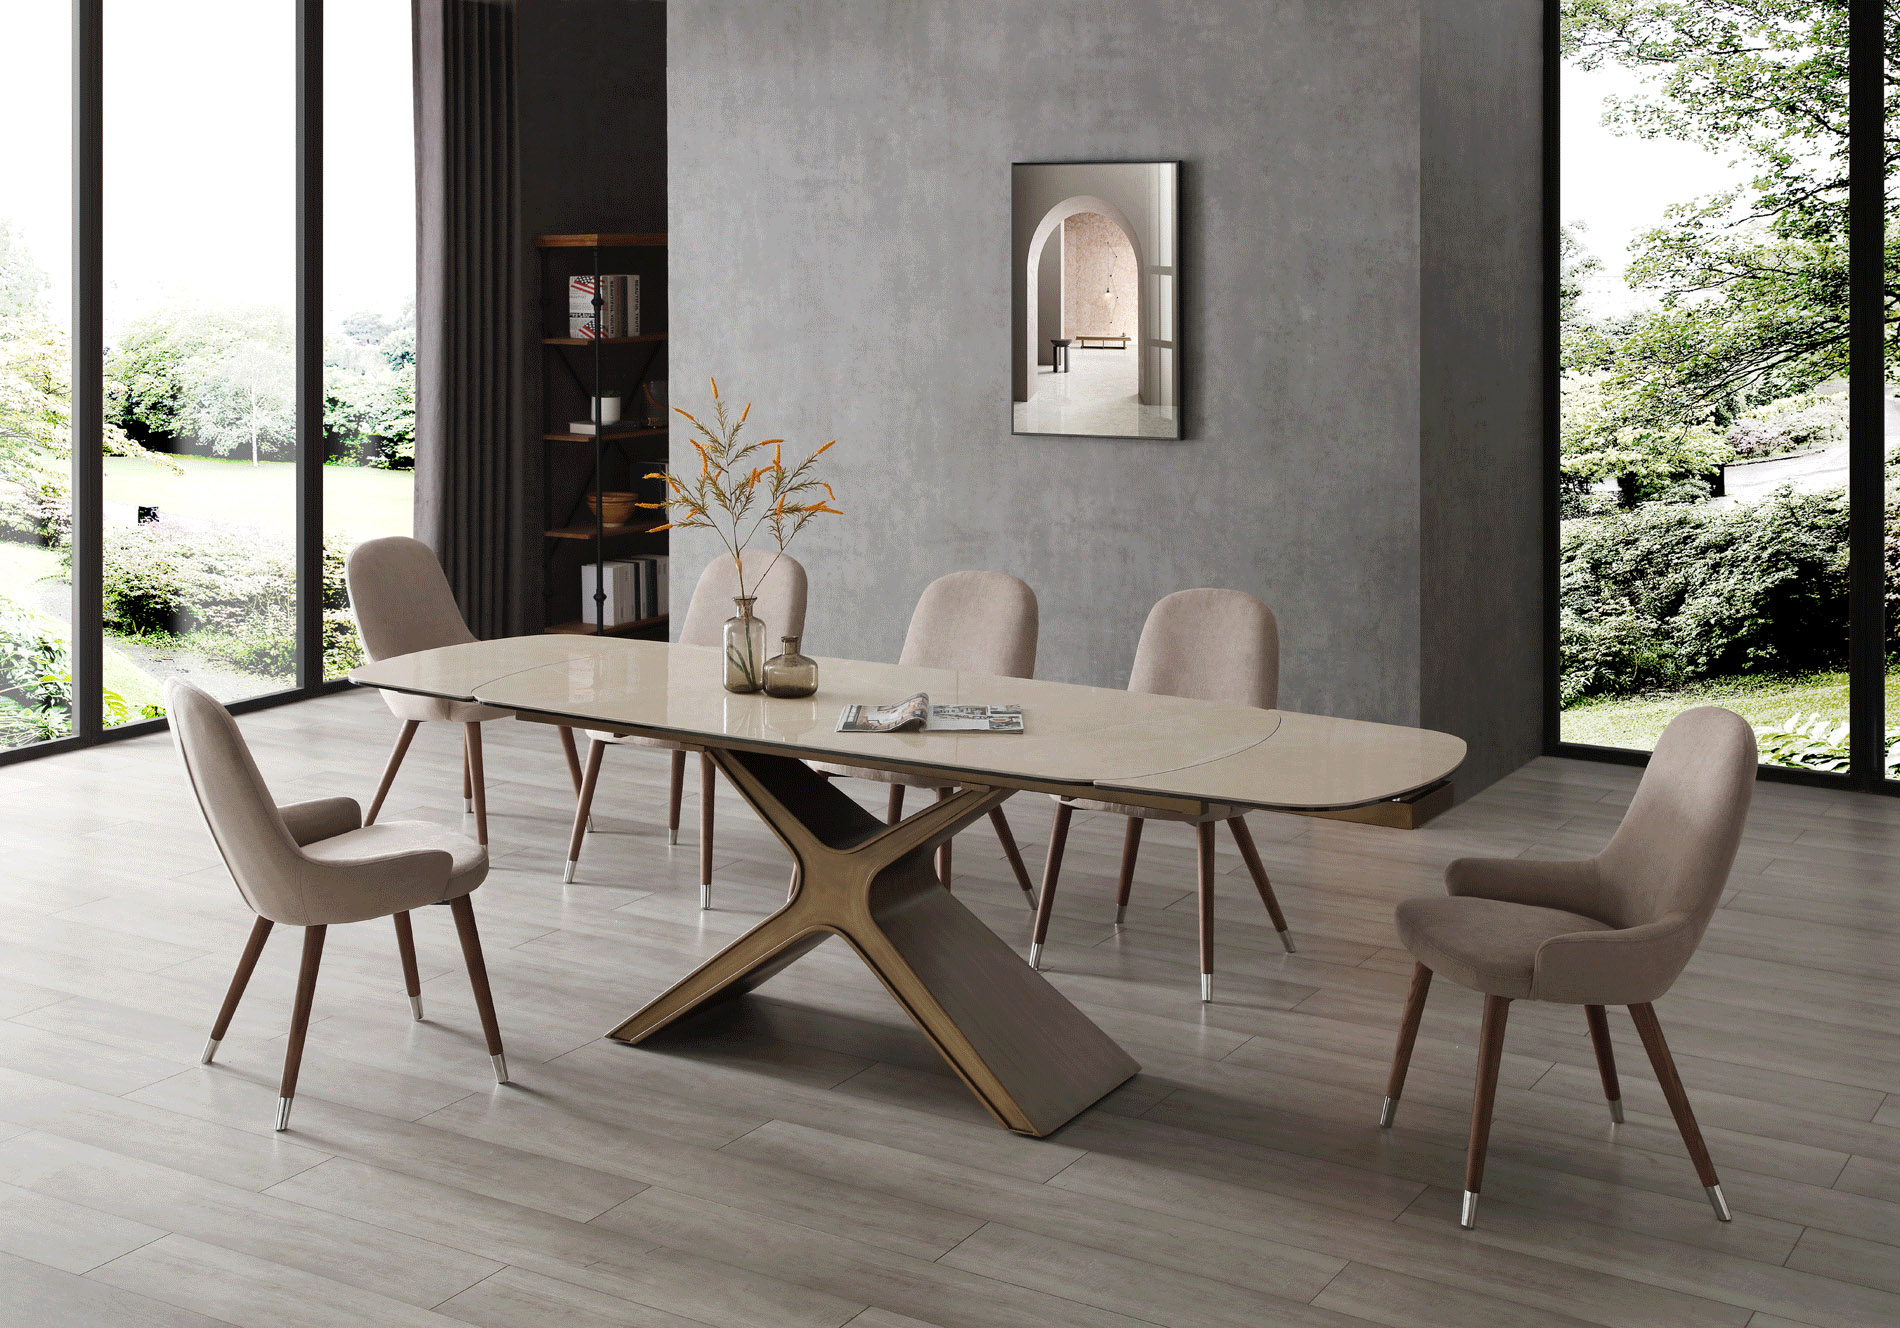 https://www.primeclassicdesign.com/images/modern-dining-sets/beige-ceramic-table-with-glass-top-and-x-shaped-base-e-9368-1287.jpg